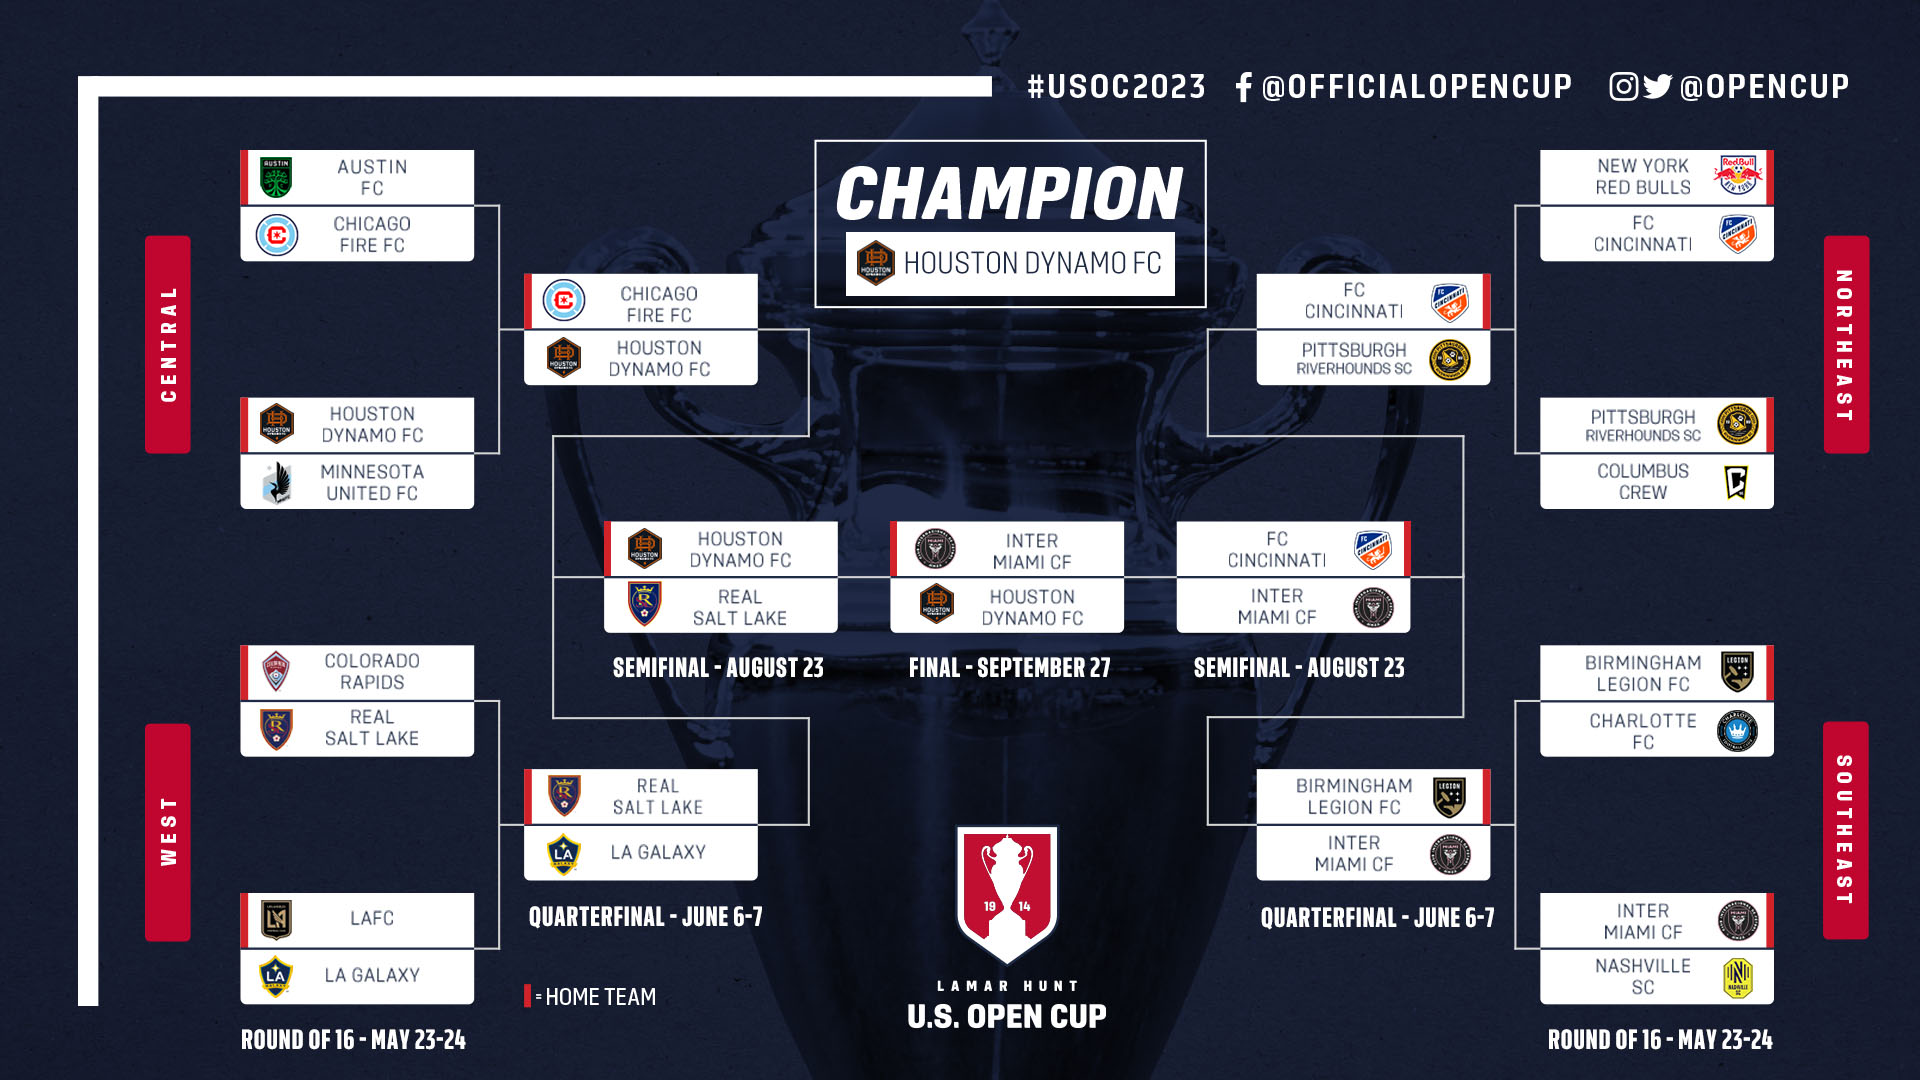 How to watch and stream 2023 U.S. Open Cup Final Inter Miami CF vs